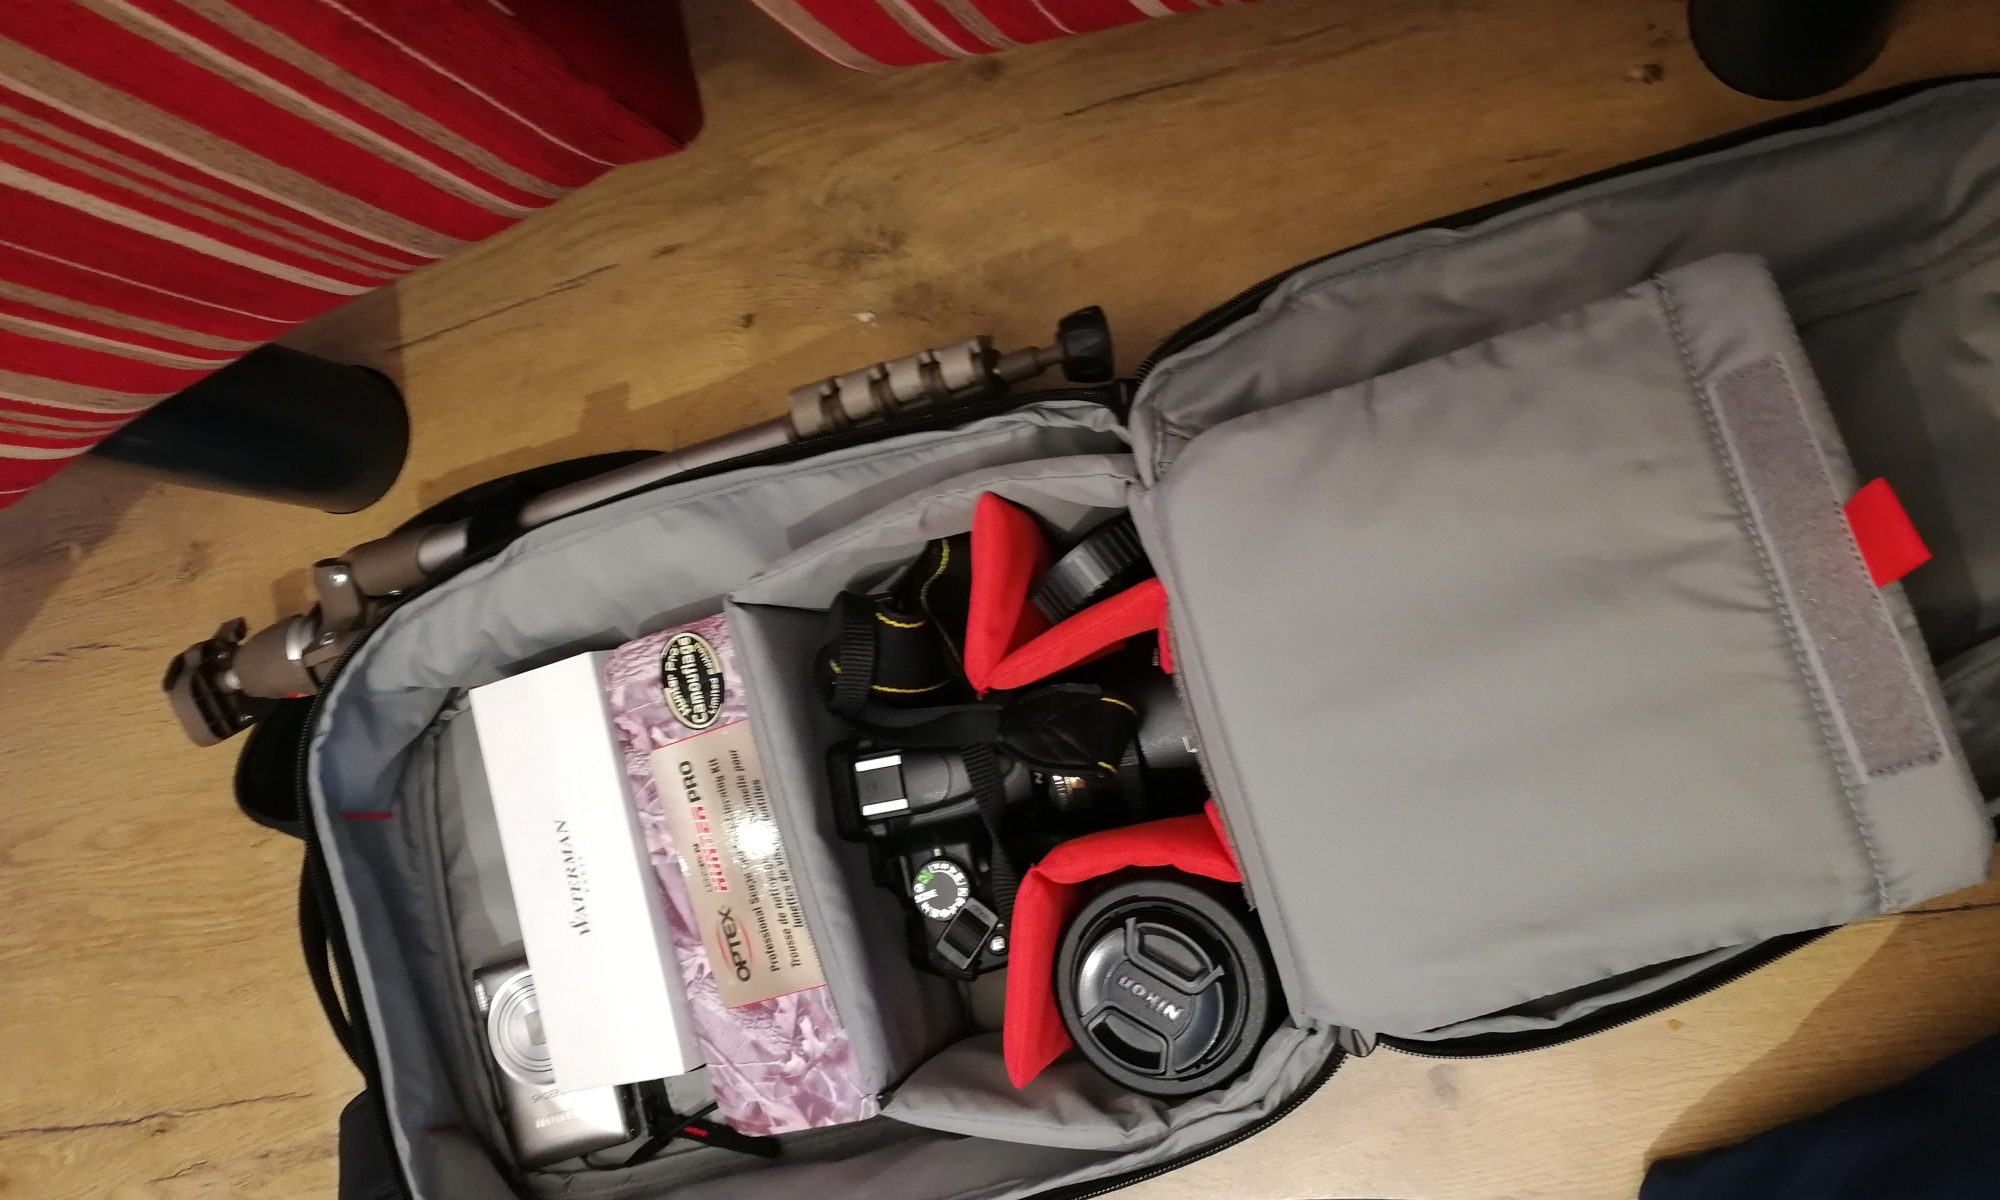 My camera kit inc Nikon D5000, 2 lenses, cleaning kit, small comact, spare SSD card, pen notebook and laptop